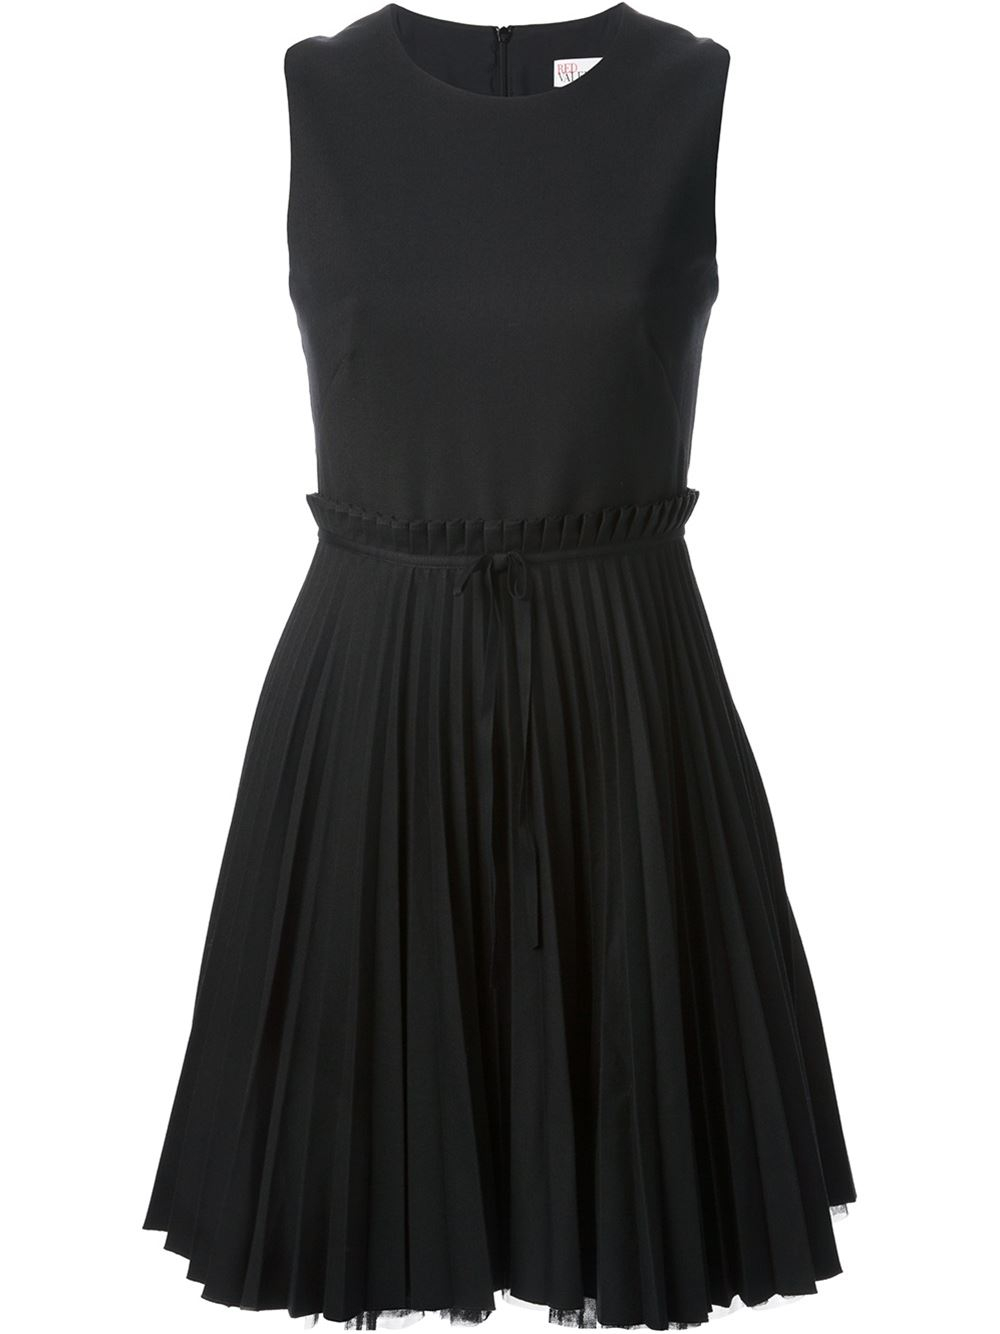 RED Valentino Pleated Dress in Black - Lyst